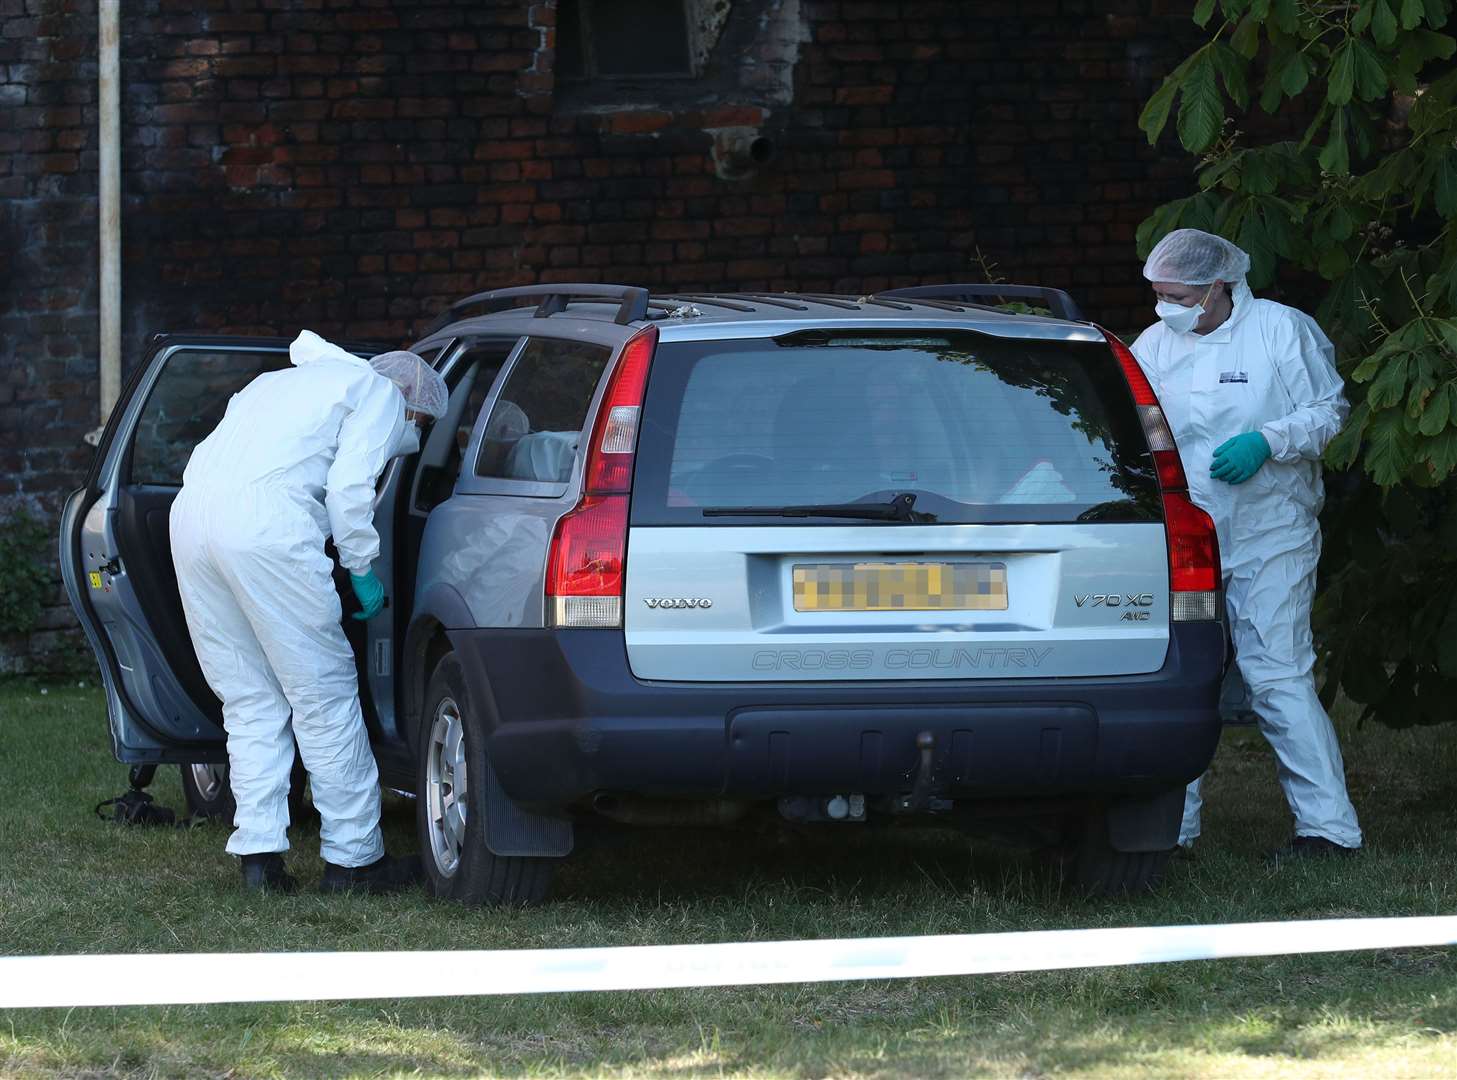 Police forensic officers search a car in the grounds of Lullingstone Castle in Eynsford, Kent (Yui Mok/PA)